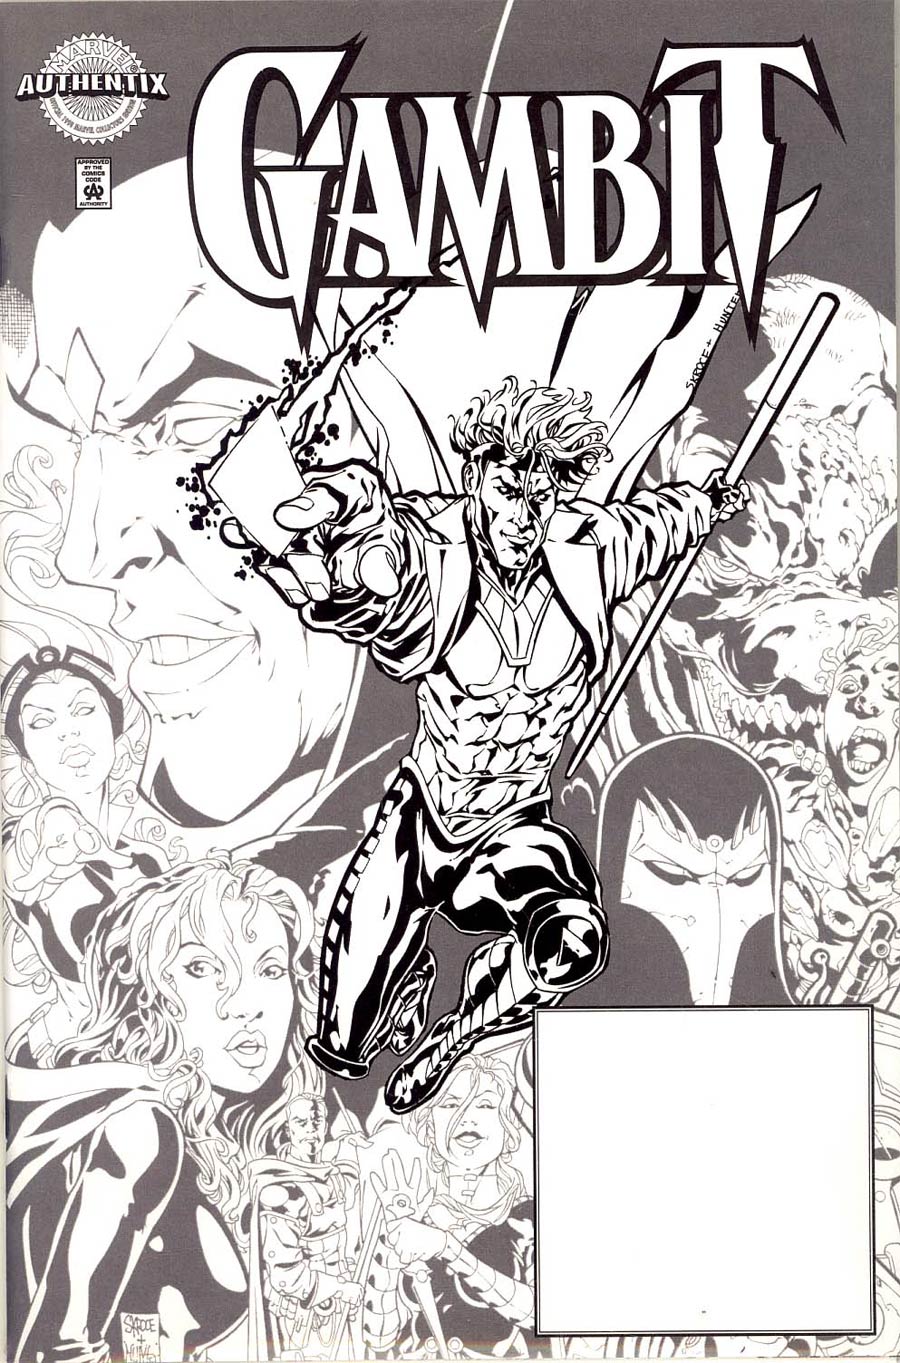 Gambit Vol 3 #1 Cover G DF Marvel Authentix Limited Edition Sketch Cover